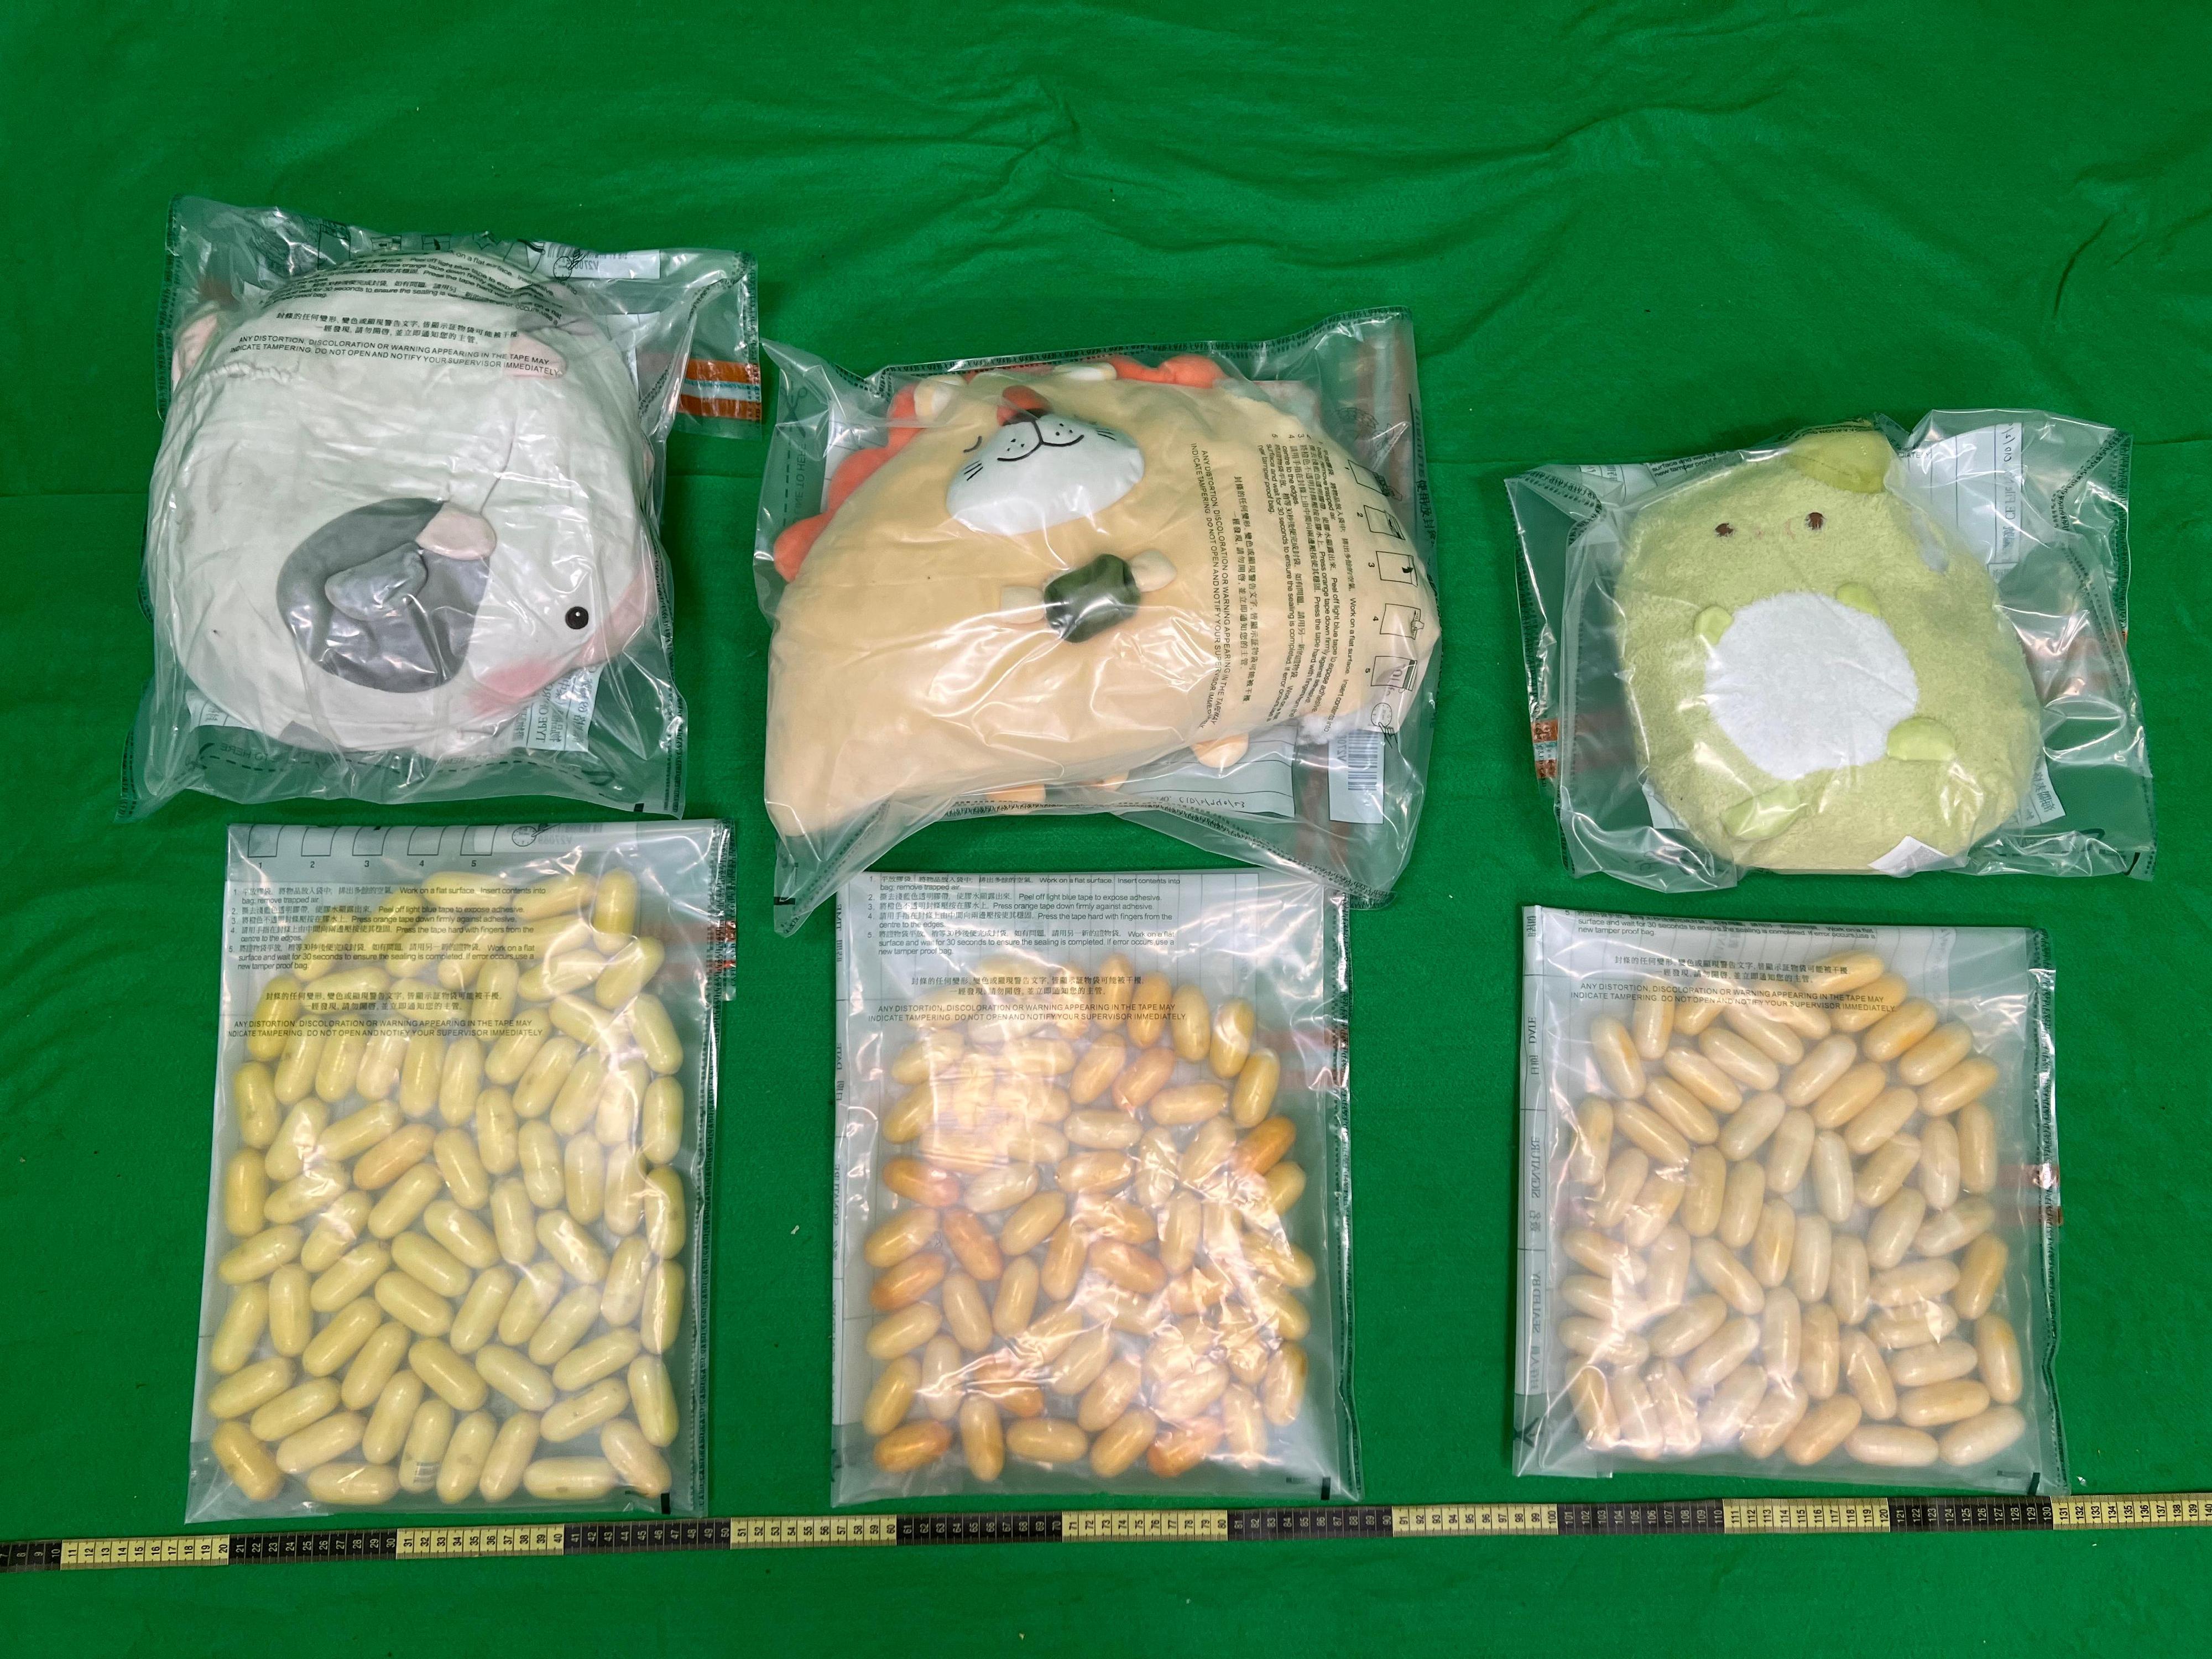 Hong Kong Customs yesterday (November 1) seized about 4.4 kilograms of suspected cocaine with an estimated market value of about $5.4 million at Hong Kong International Airport. Photo shows the suspected cocaine seized, and the stuffed toys used to conceal the drugs.